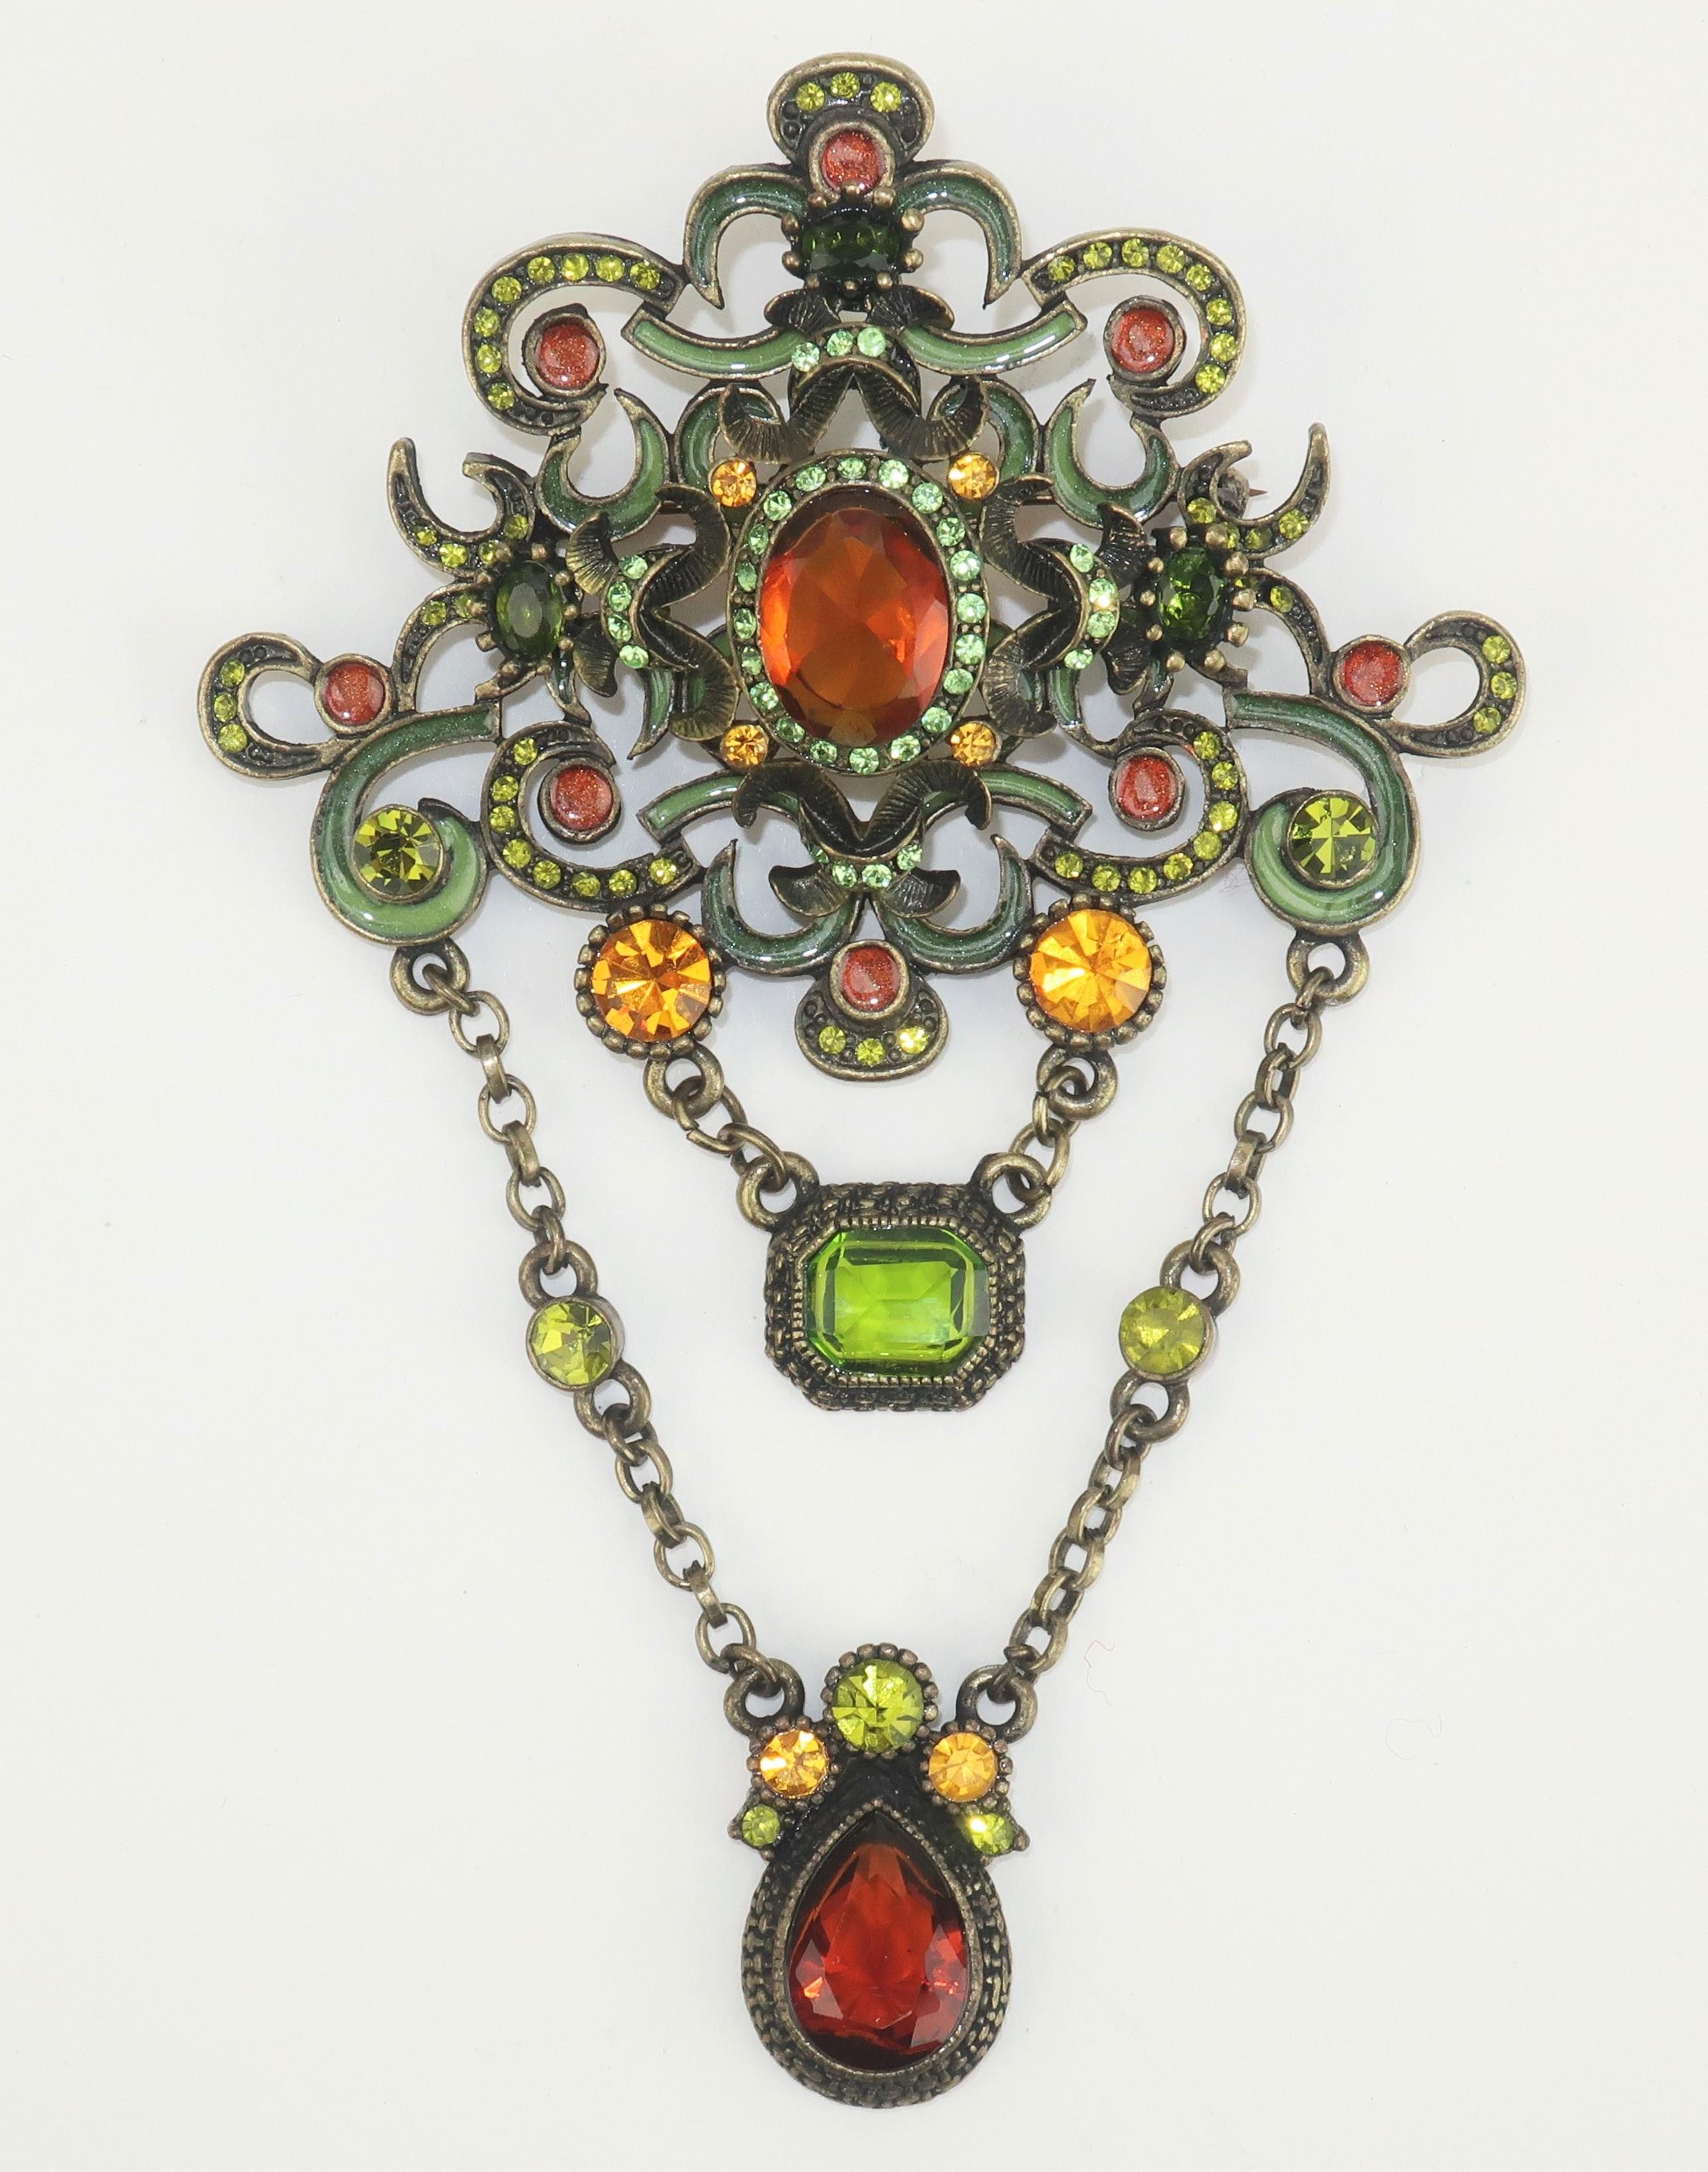 C.1990 brooch with an ornate Old World style reminiscent of Edwardian jewelry.  The bronze tone metal base is embellished with deep green and amber enameling and features two dangling drops accented by green and amber crystal stones.  Outfitted with